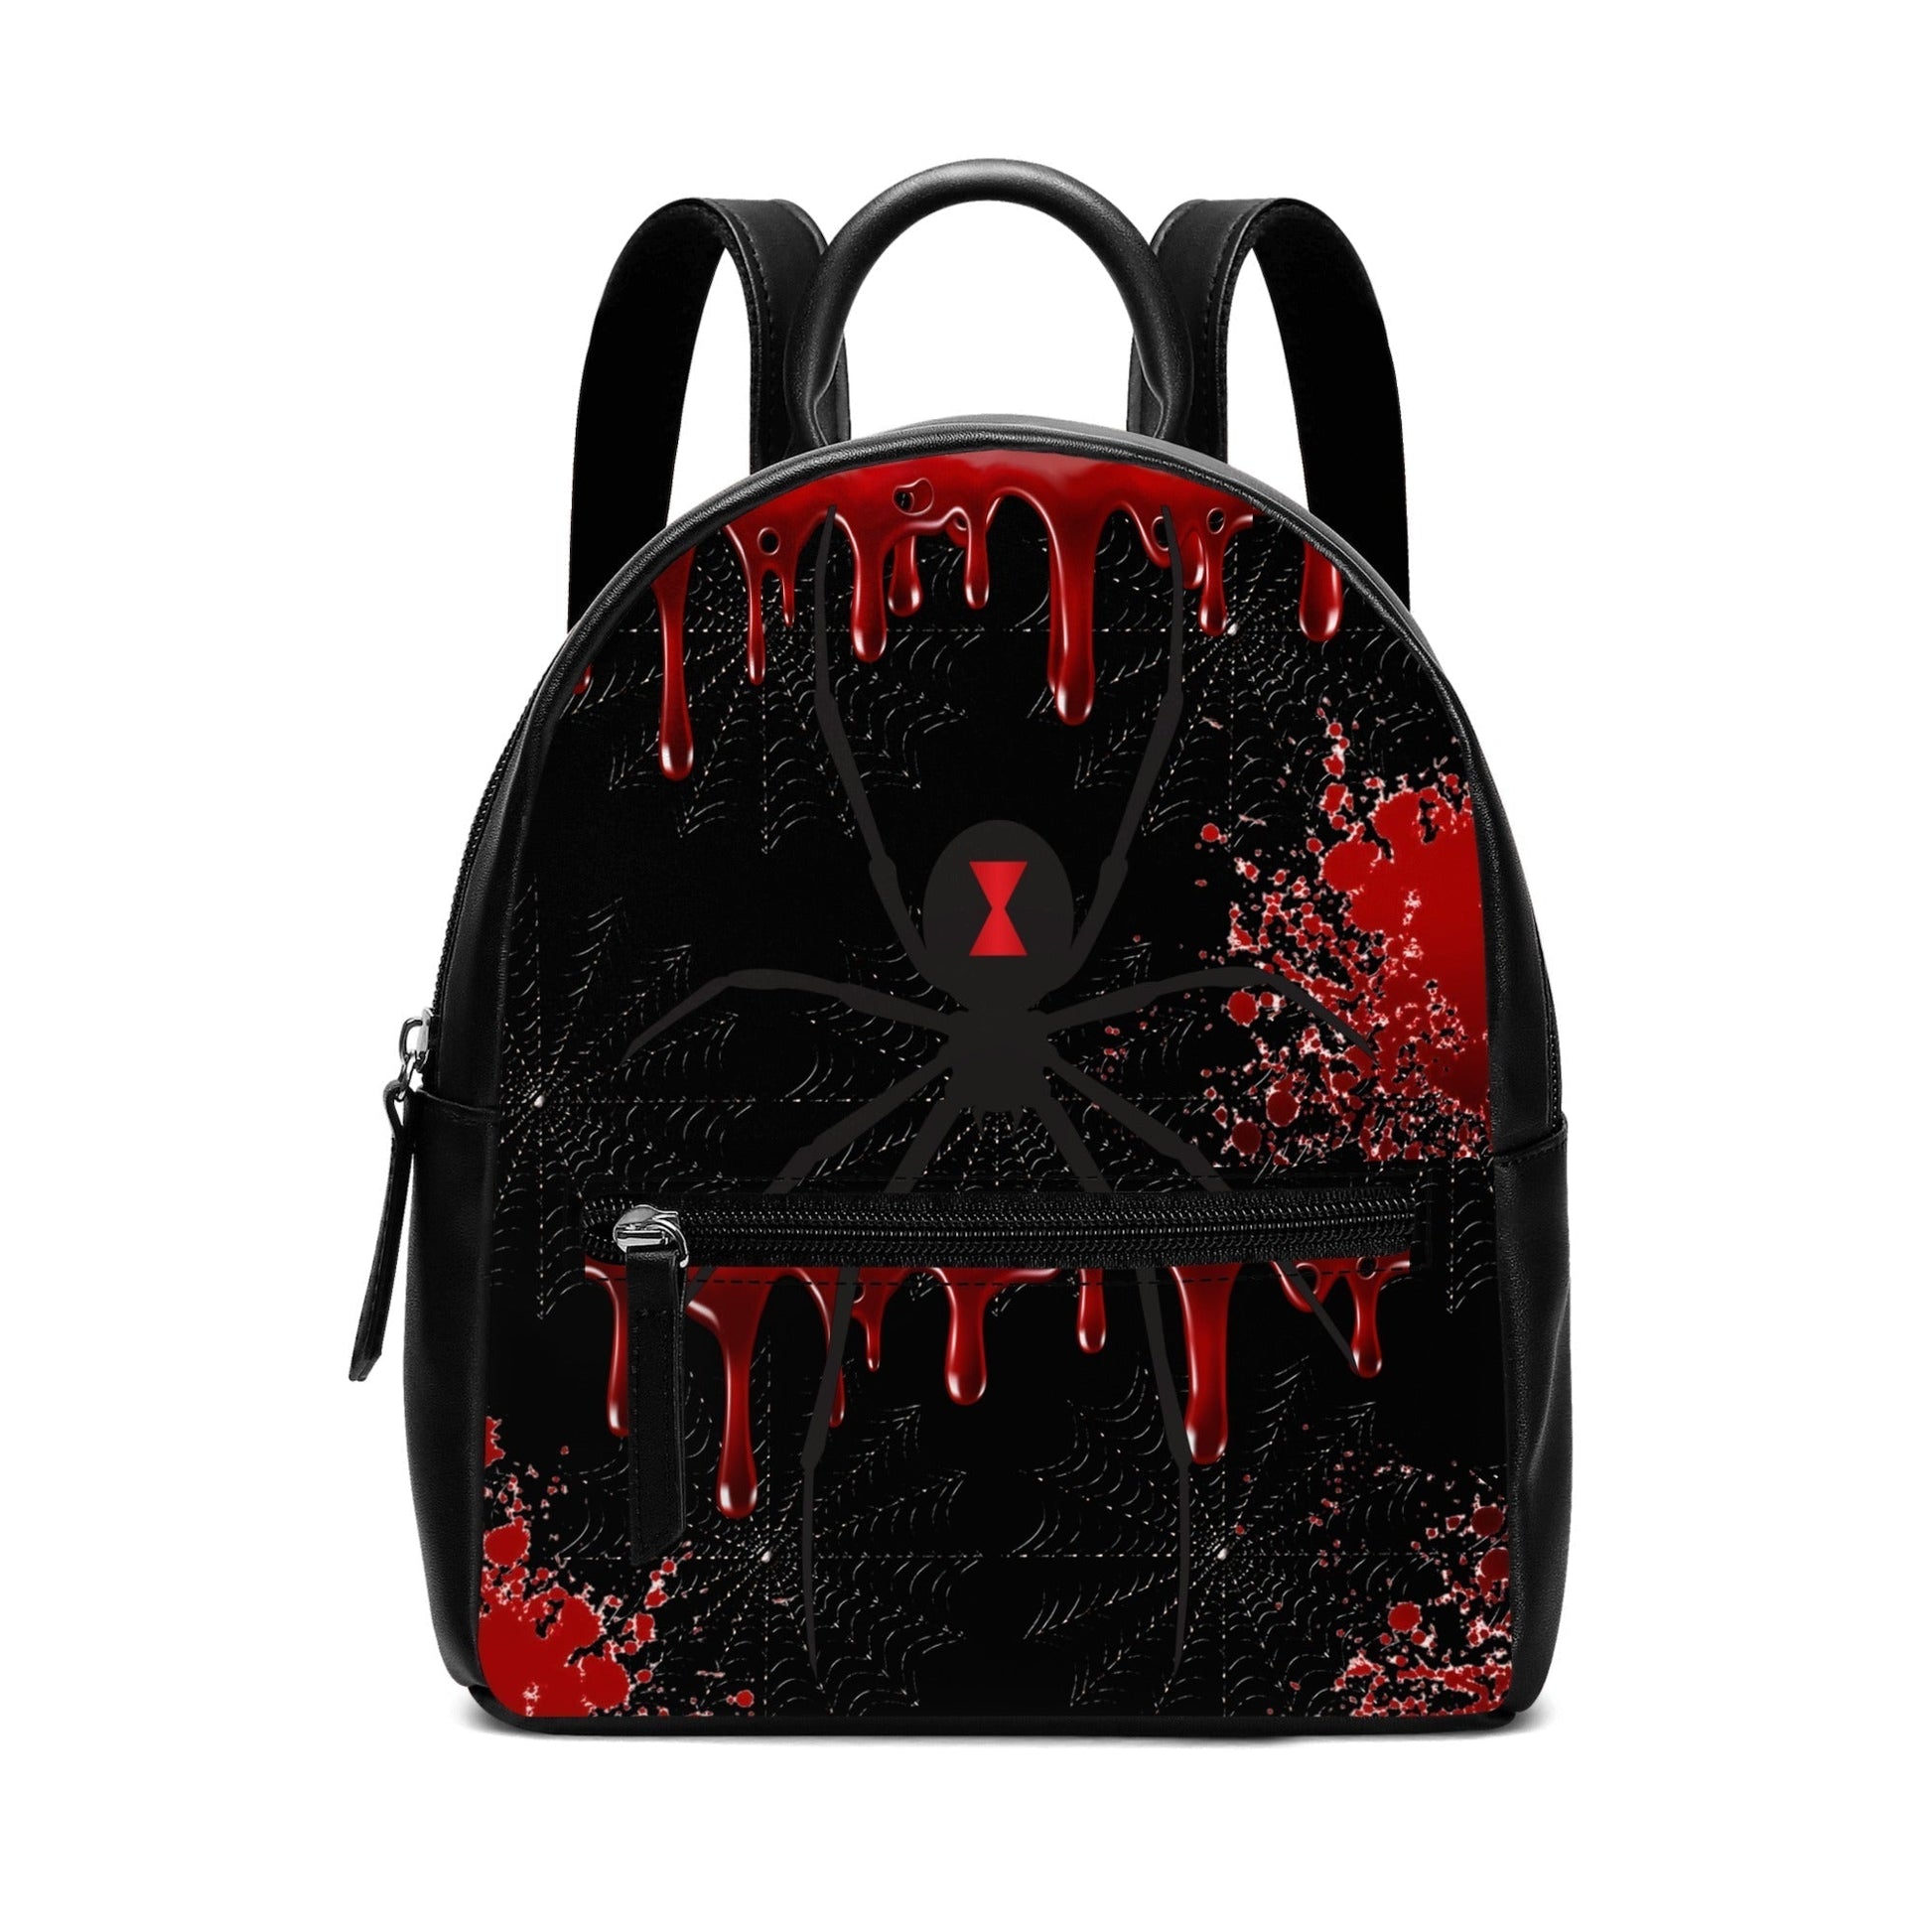 Stand out  with the  Spider Queen Cute PU Backpack  available at Hey Nugget. Grab yours today!